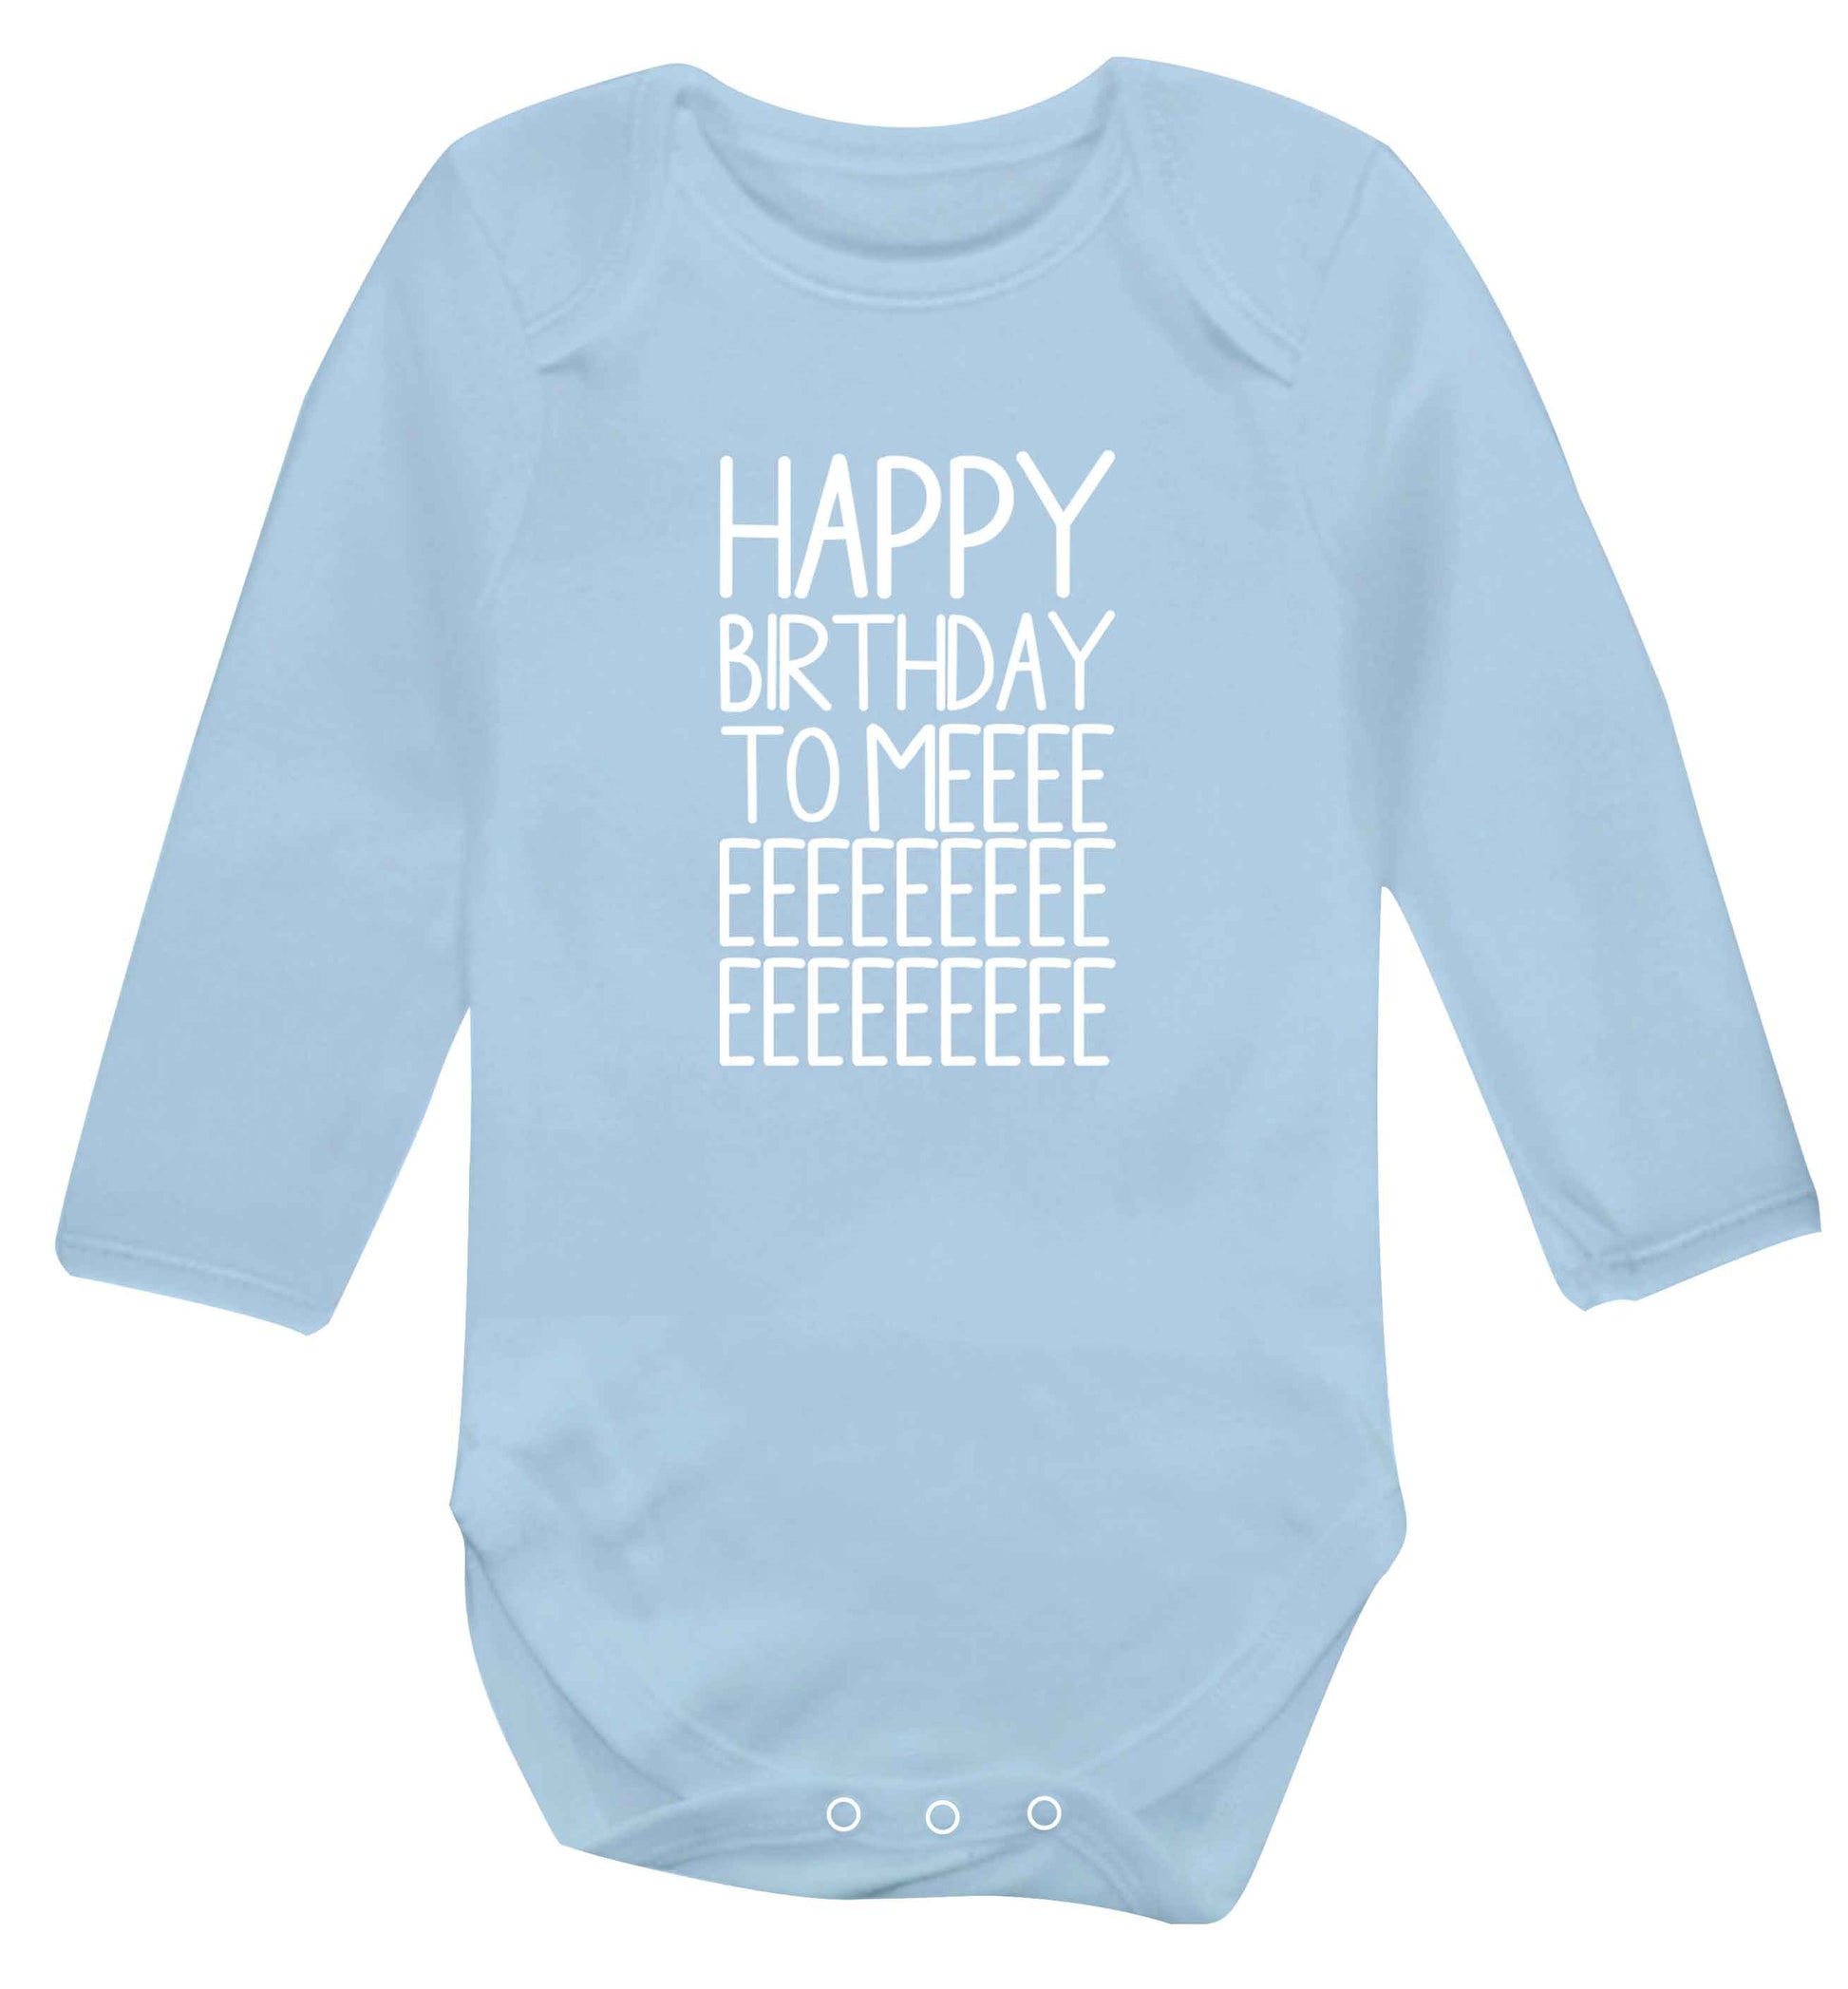 Happy birthday to me baby vest long sleeved pale blue 6-12 months